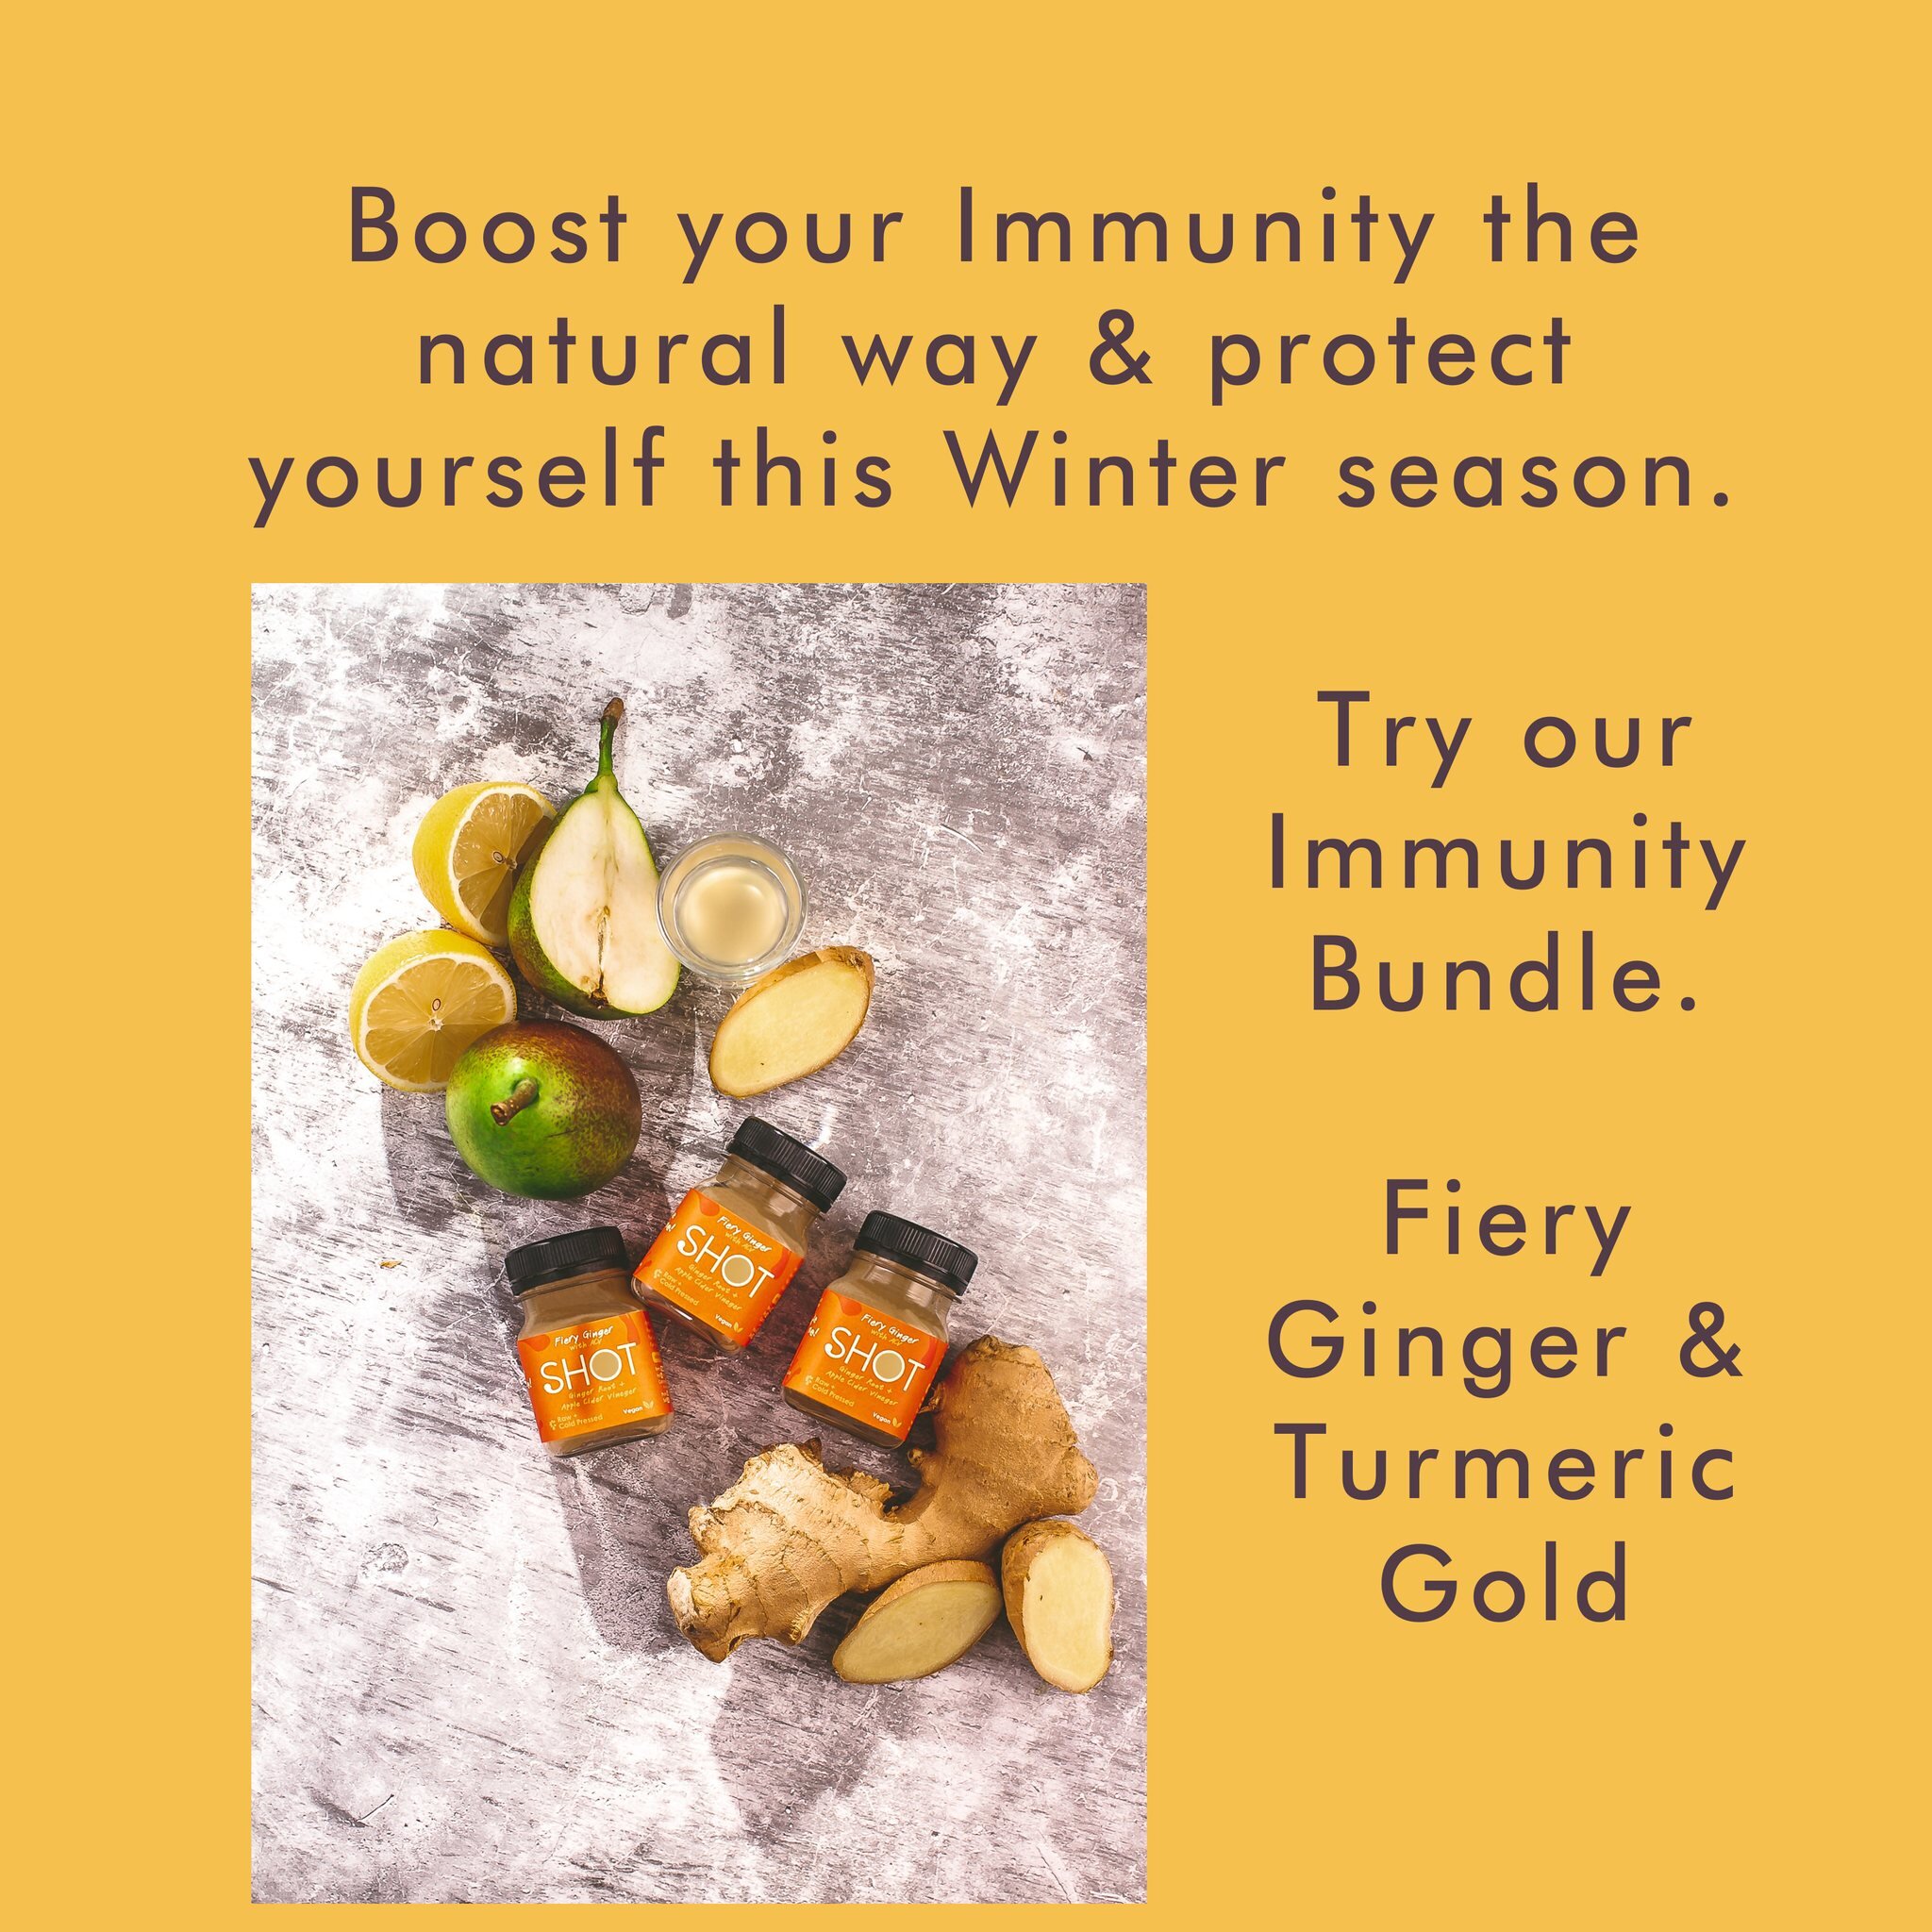 This really is IMMUNITY at its best keeping colds and flu at bay, the natural way with SHOT IMMUNITY ++ bundle. 

See our latest offer to help you get protected this Winter

🍂 Get Free delivery &amp; FREE shots in every IMMUNITY ++ bundle. 
 (21 SHO